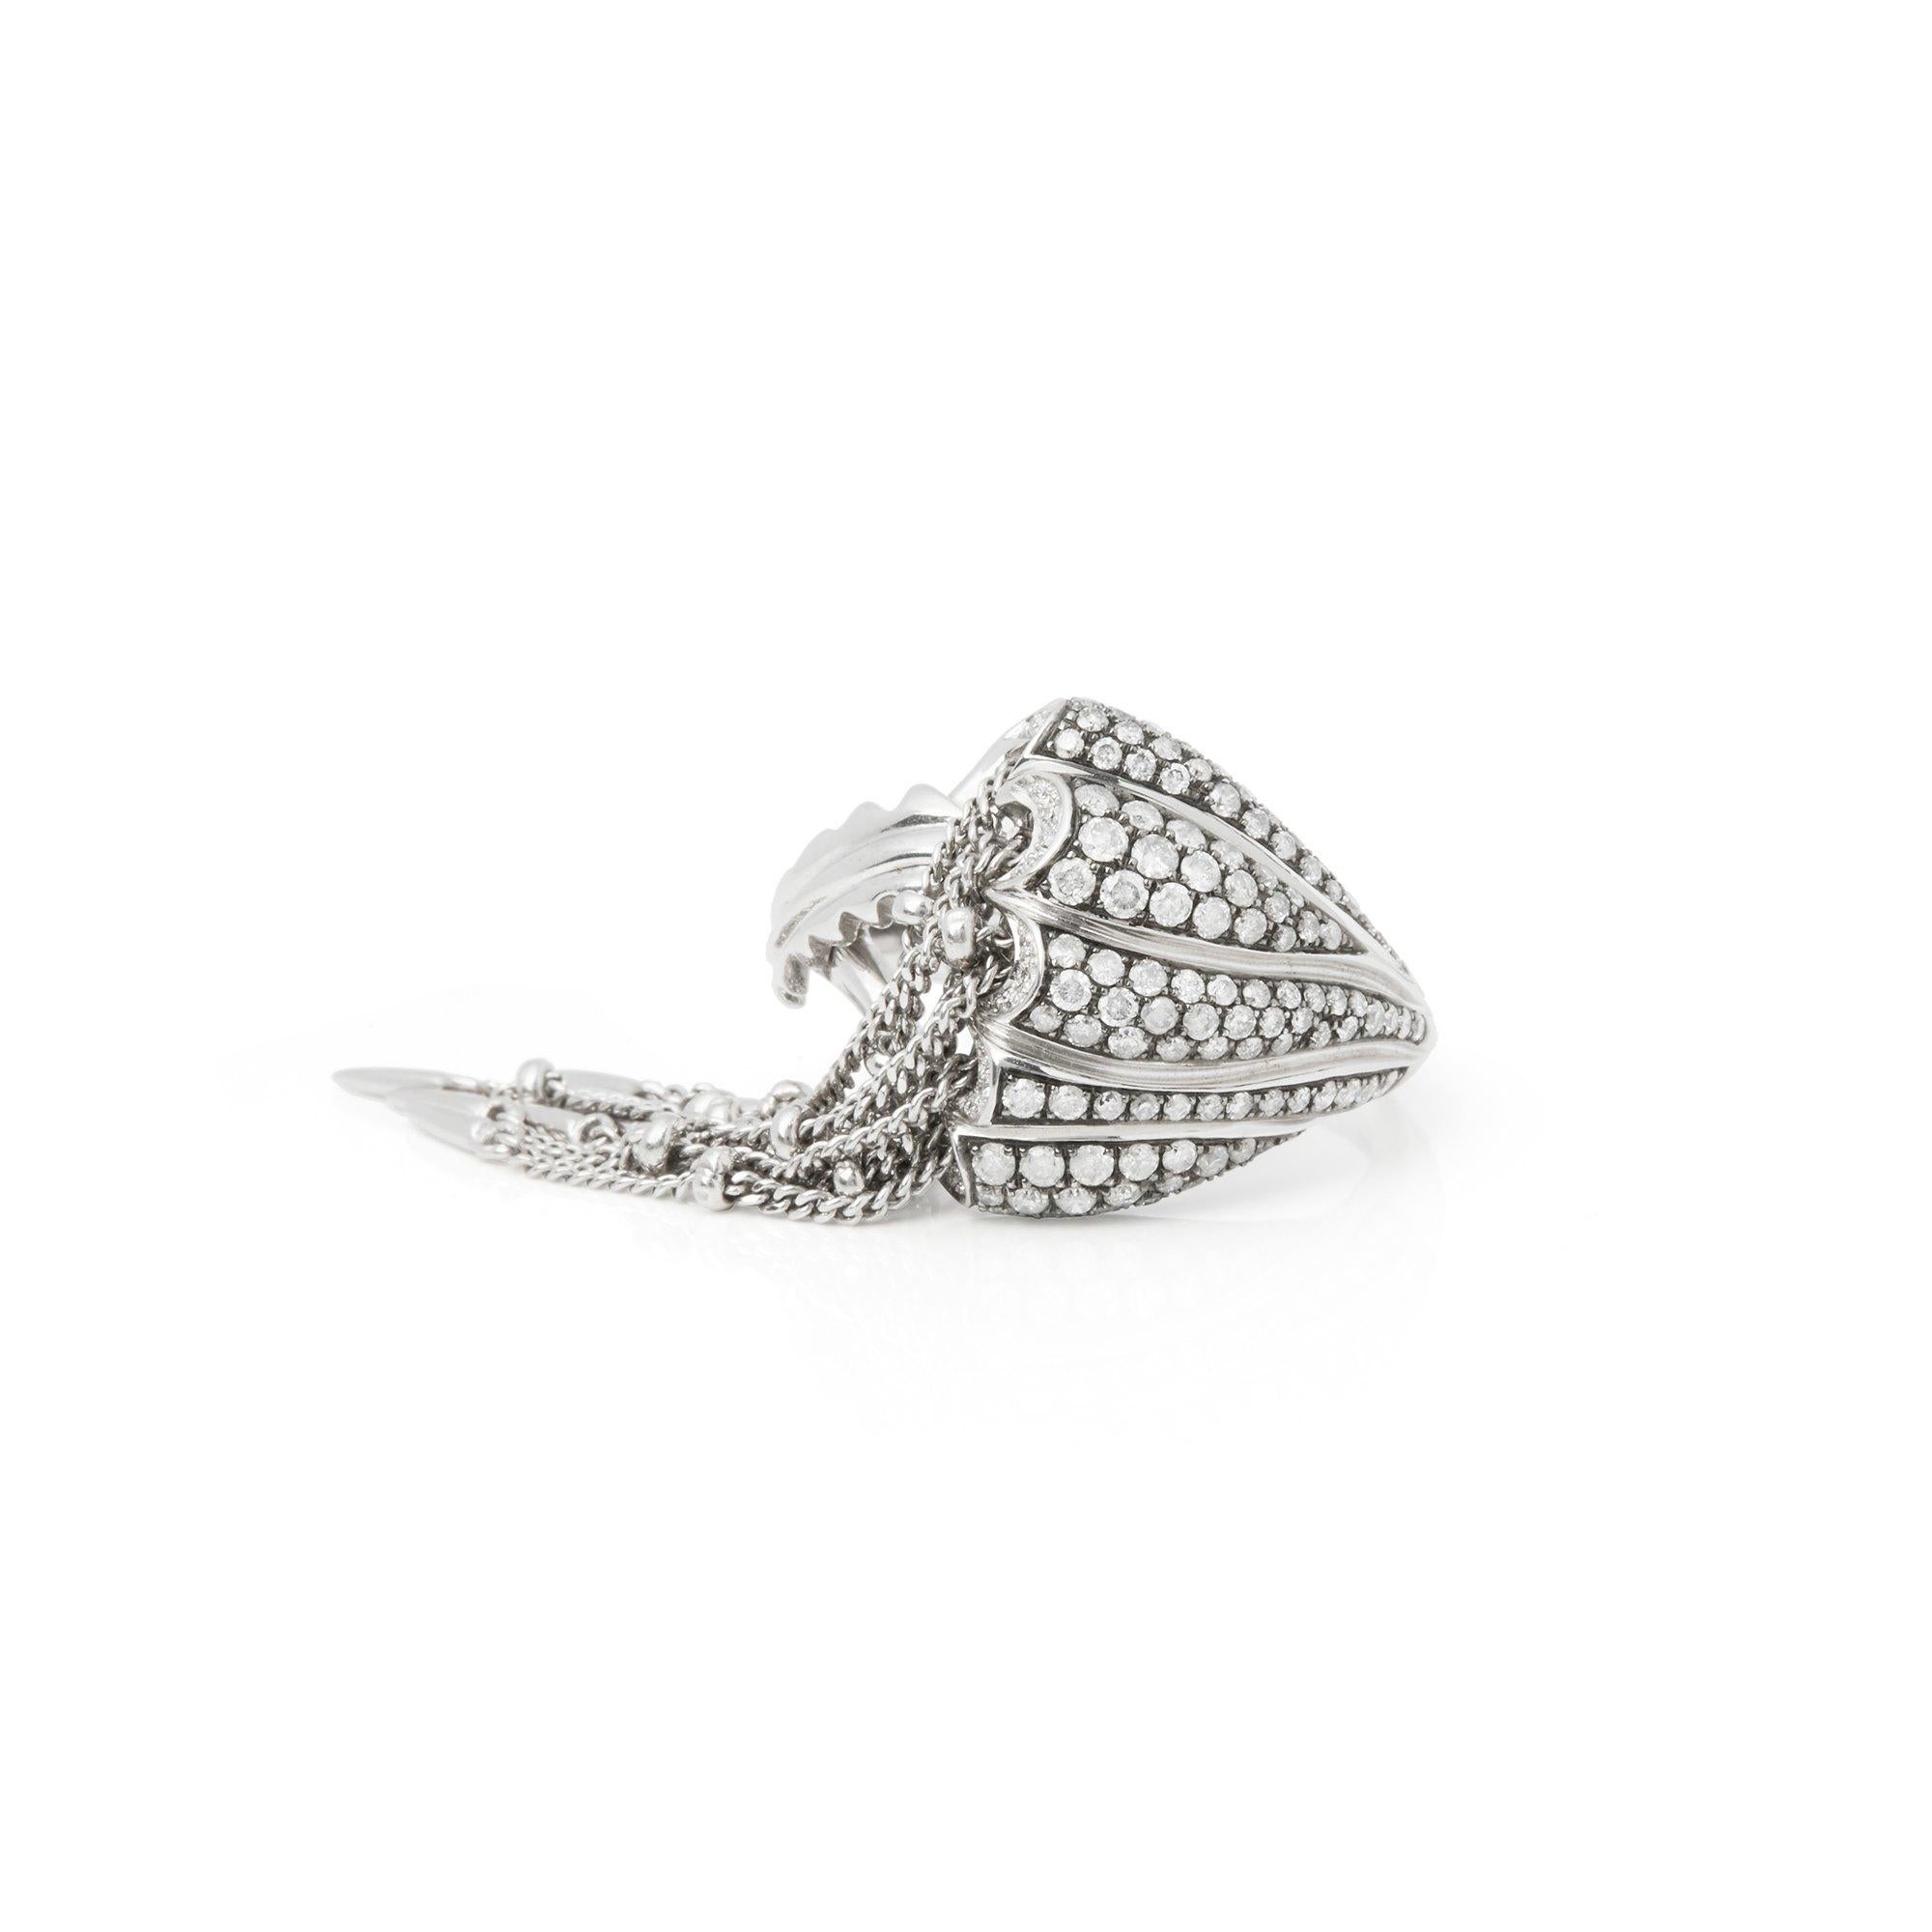 This ring by Stephen Webster is from his Jewels Verne collection and features 124 round cut white diamonds in the form of a jellyfish. Set in white gold with signature band. Complete with Xupes presentation box. Our Xupes reference is COMJ391 should